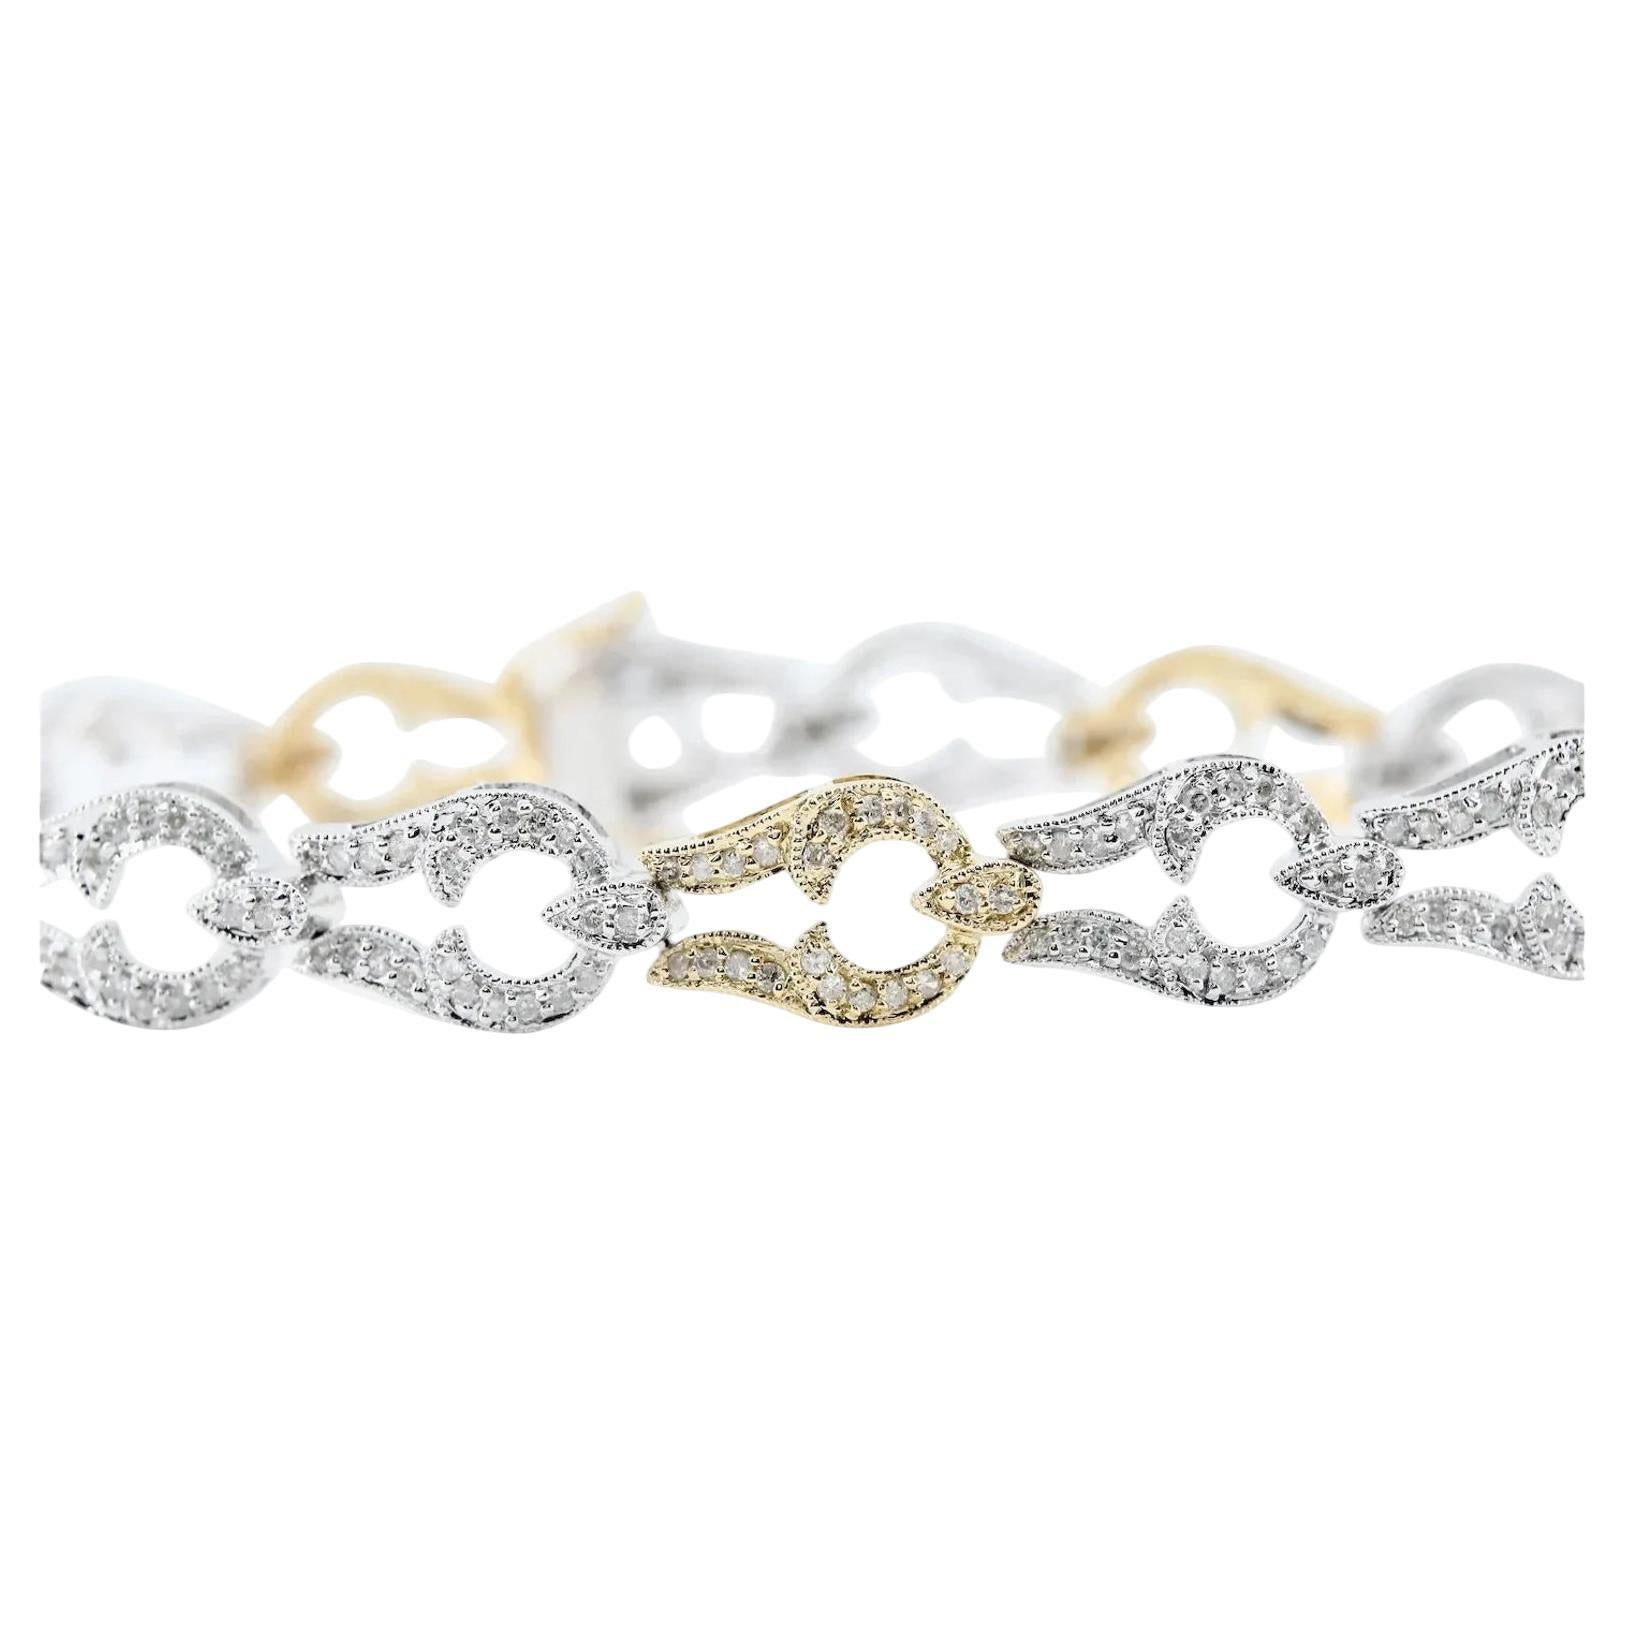 Two Tone Fancy Yellow & Colorless Pave Diamond Bracelet in 18K Gold